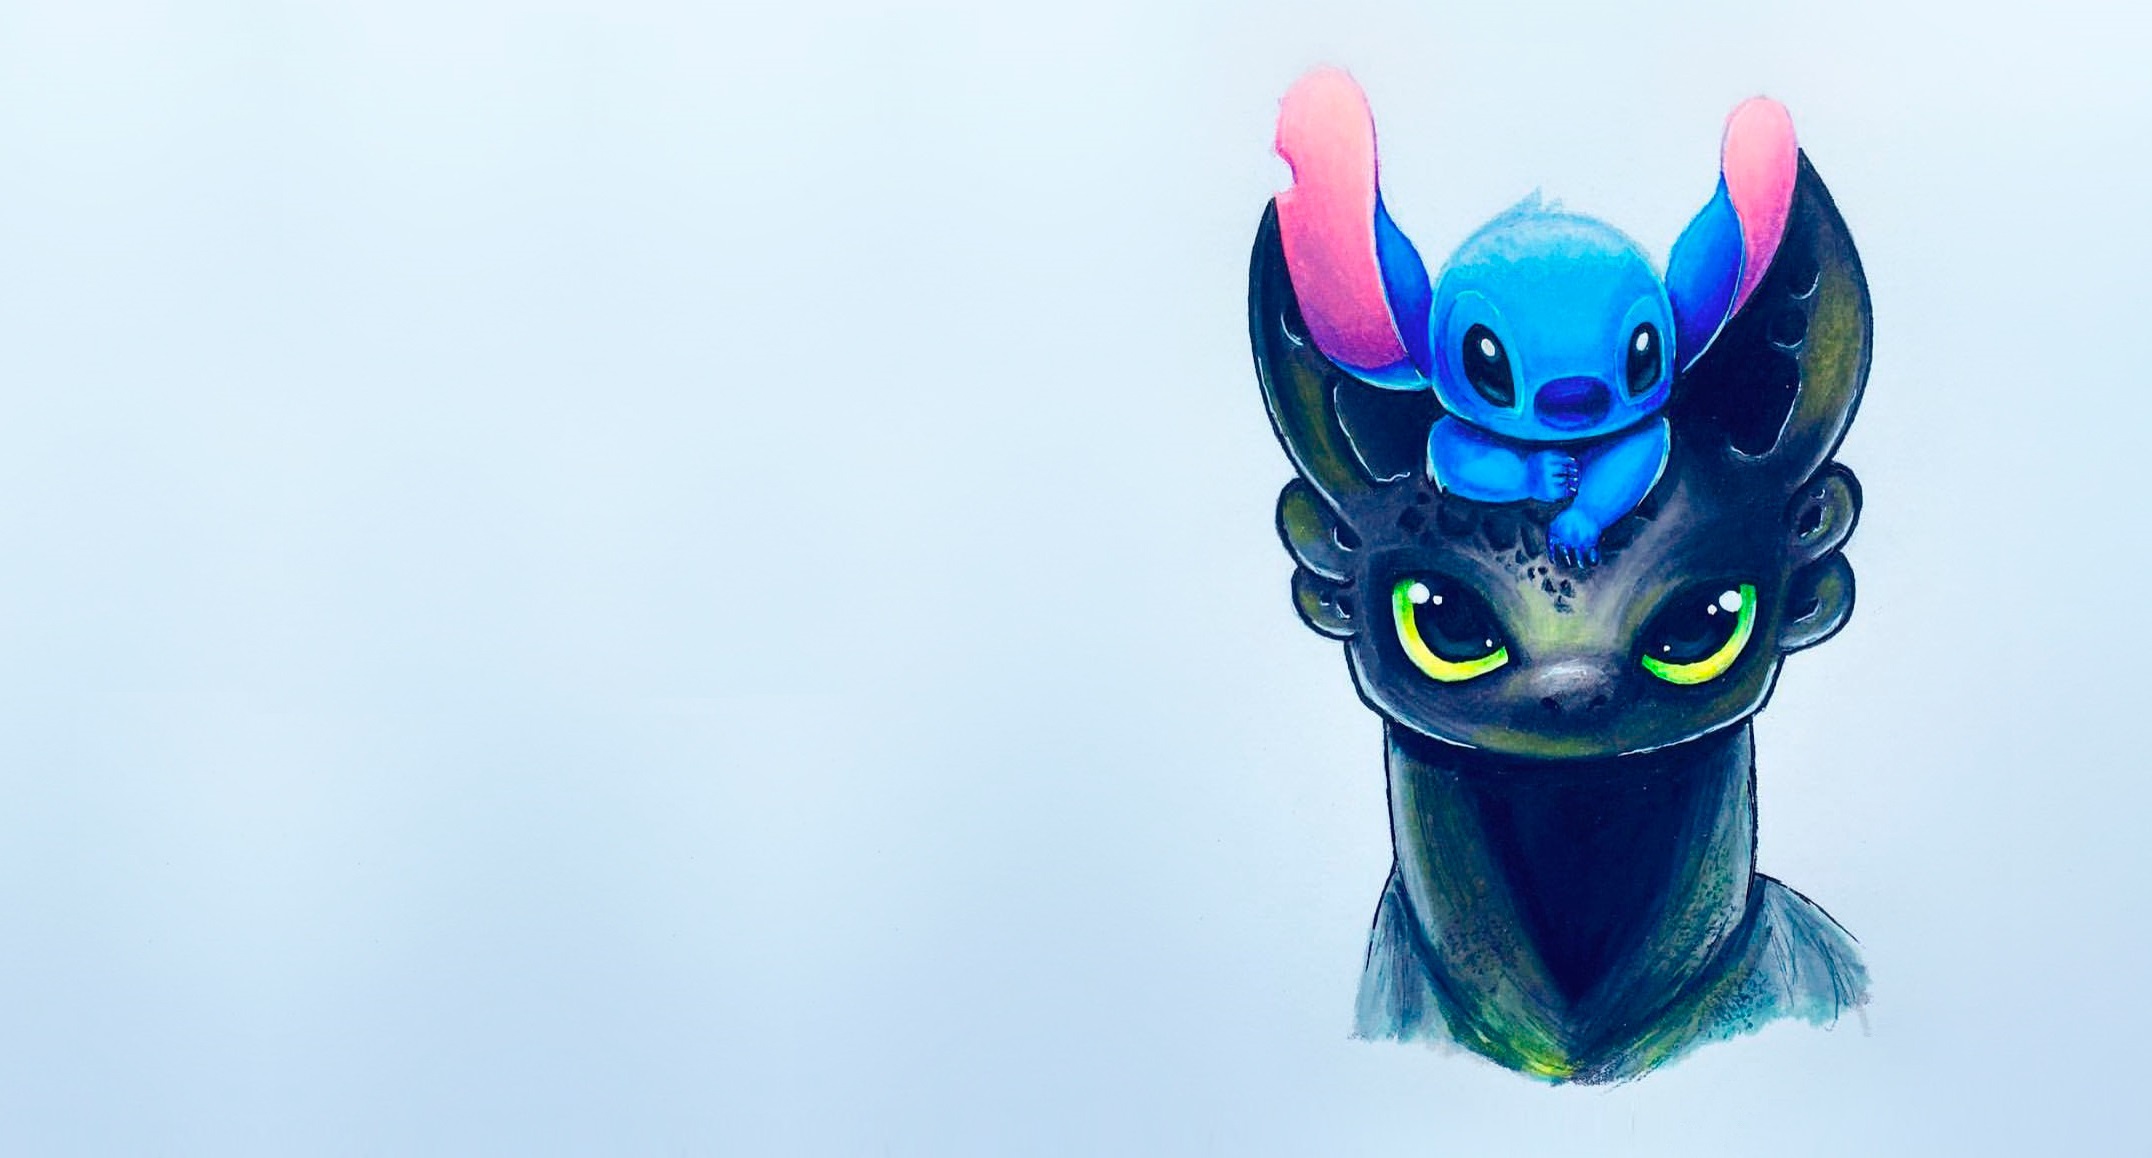 Download wallpaper figure art kids toothless childrens stitch section minimalism in resolution x